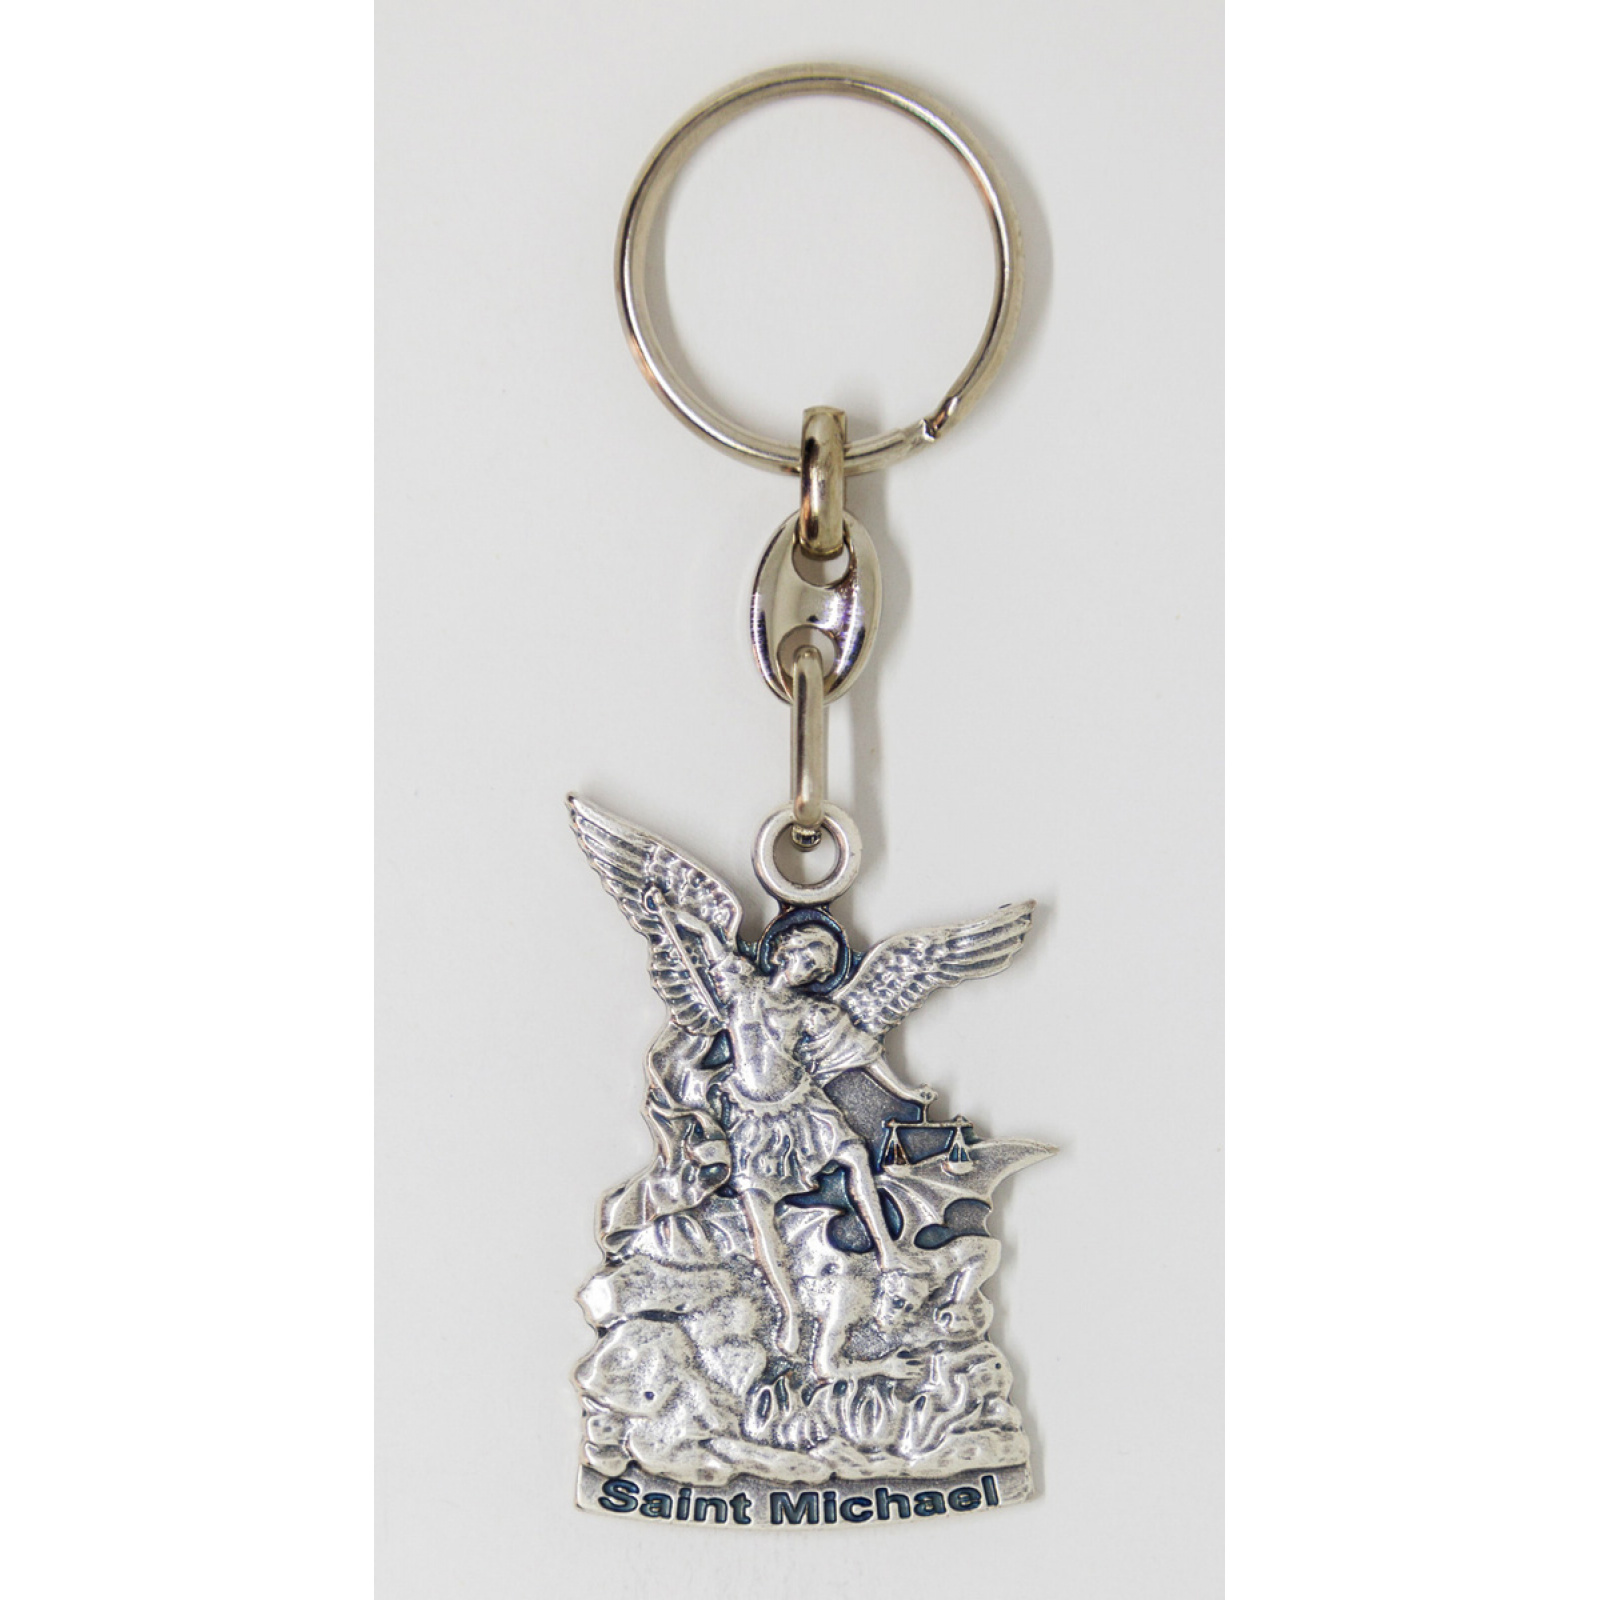 Detail St Michael Police Keychain Nomer 19